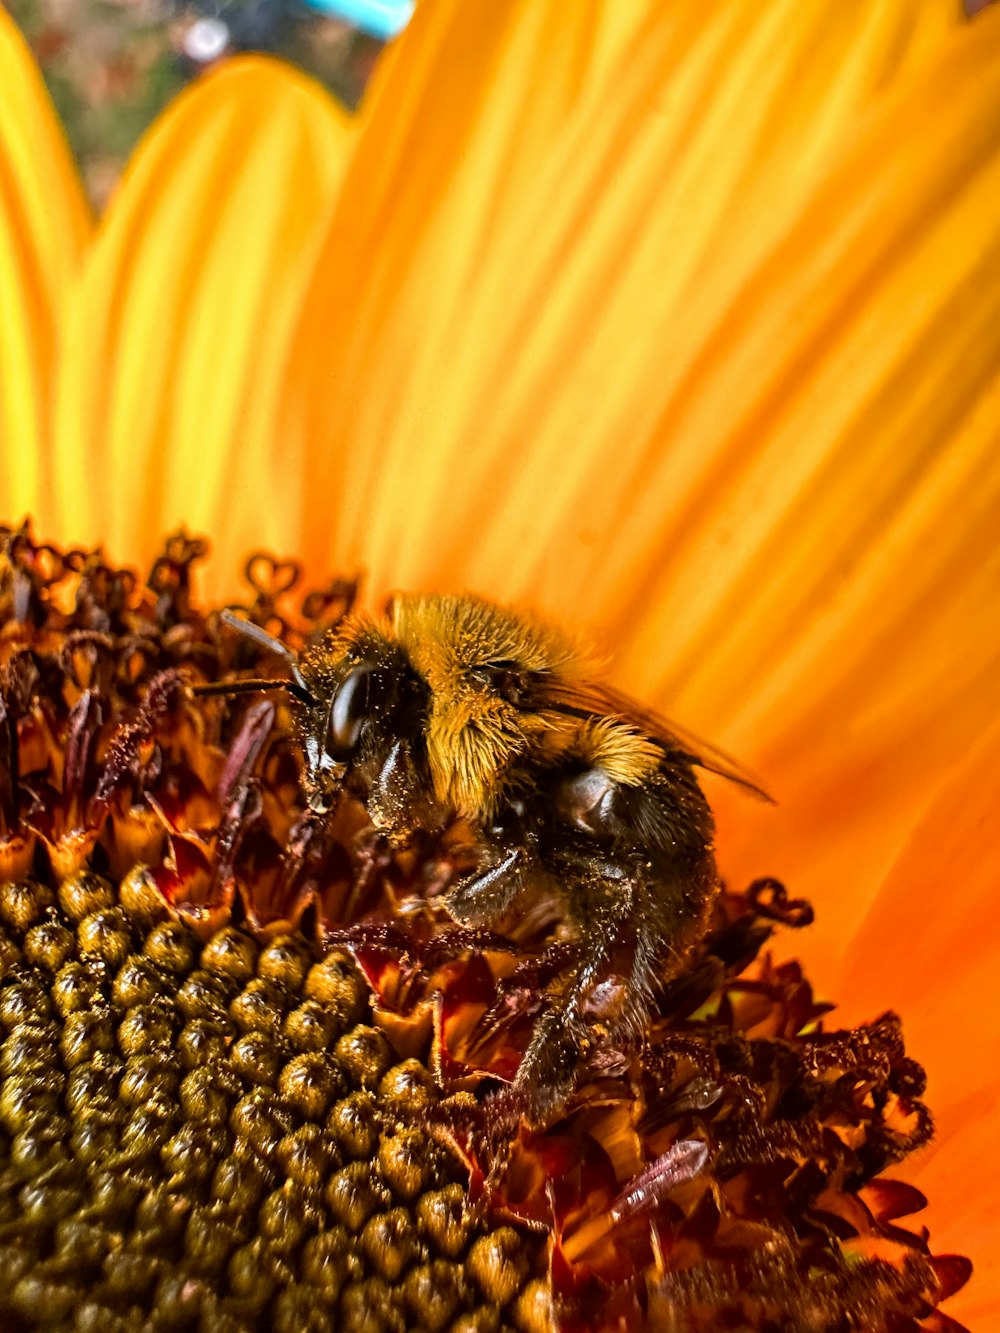 a close up of a bee on a sunflower